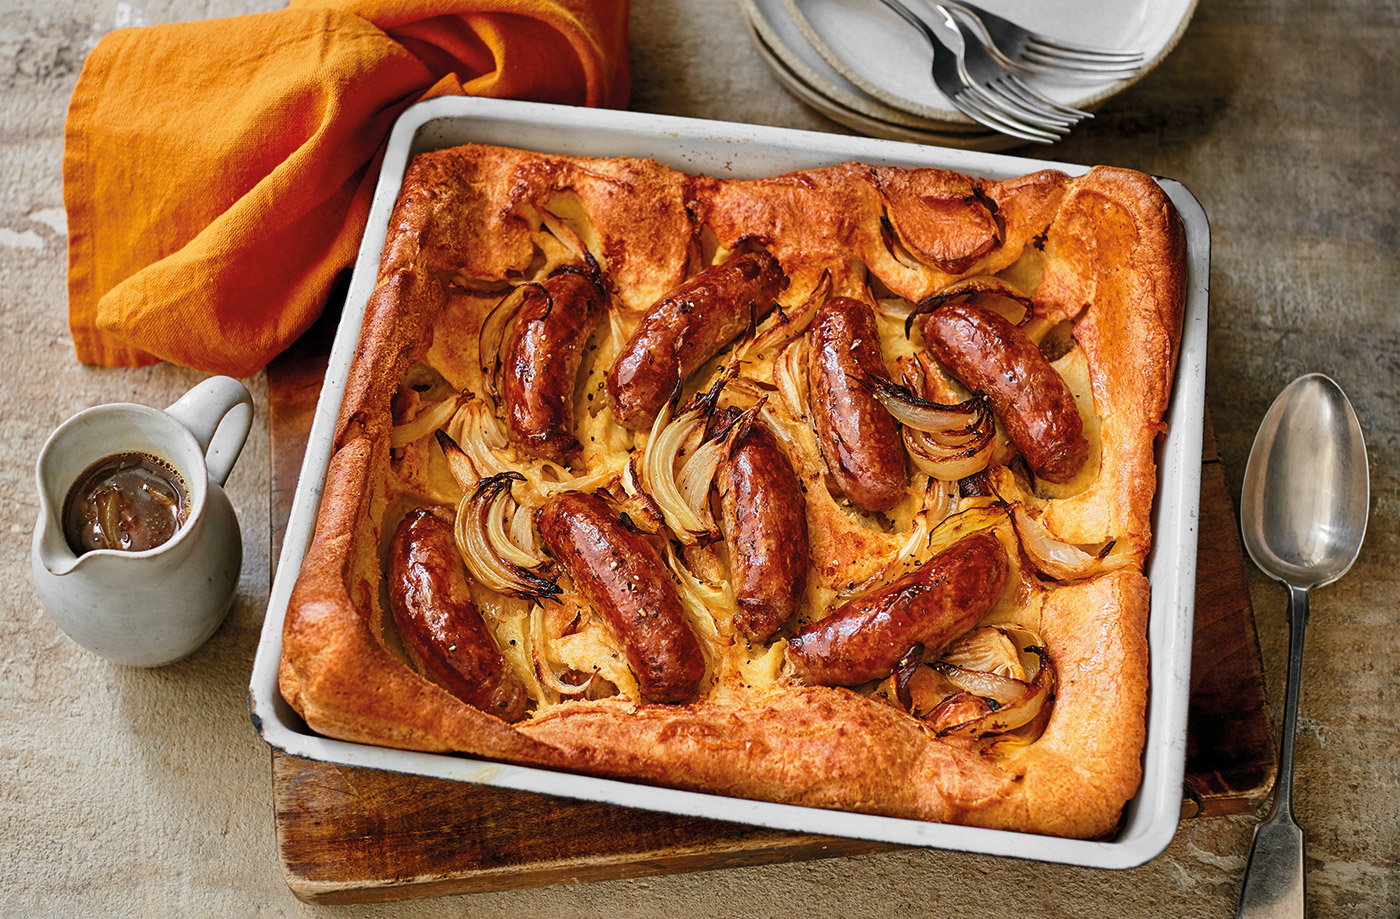 Toad in the Hole - Source: Tesco